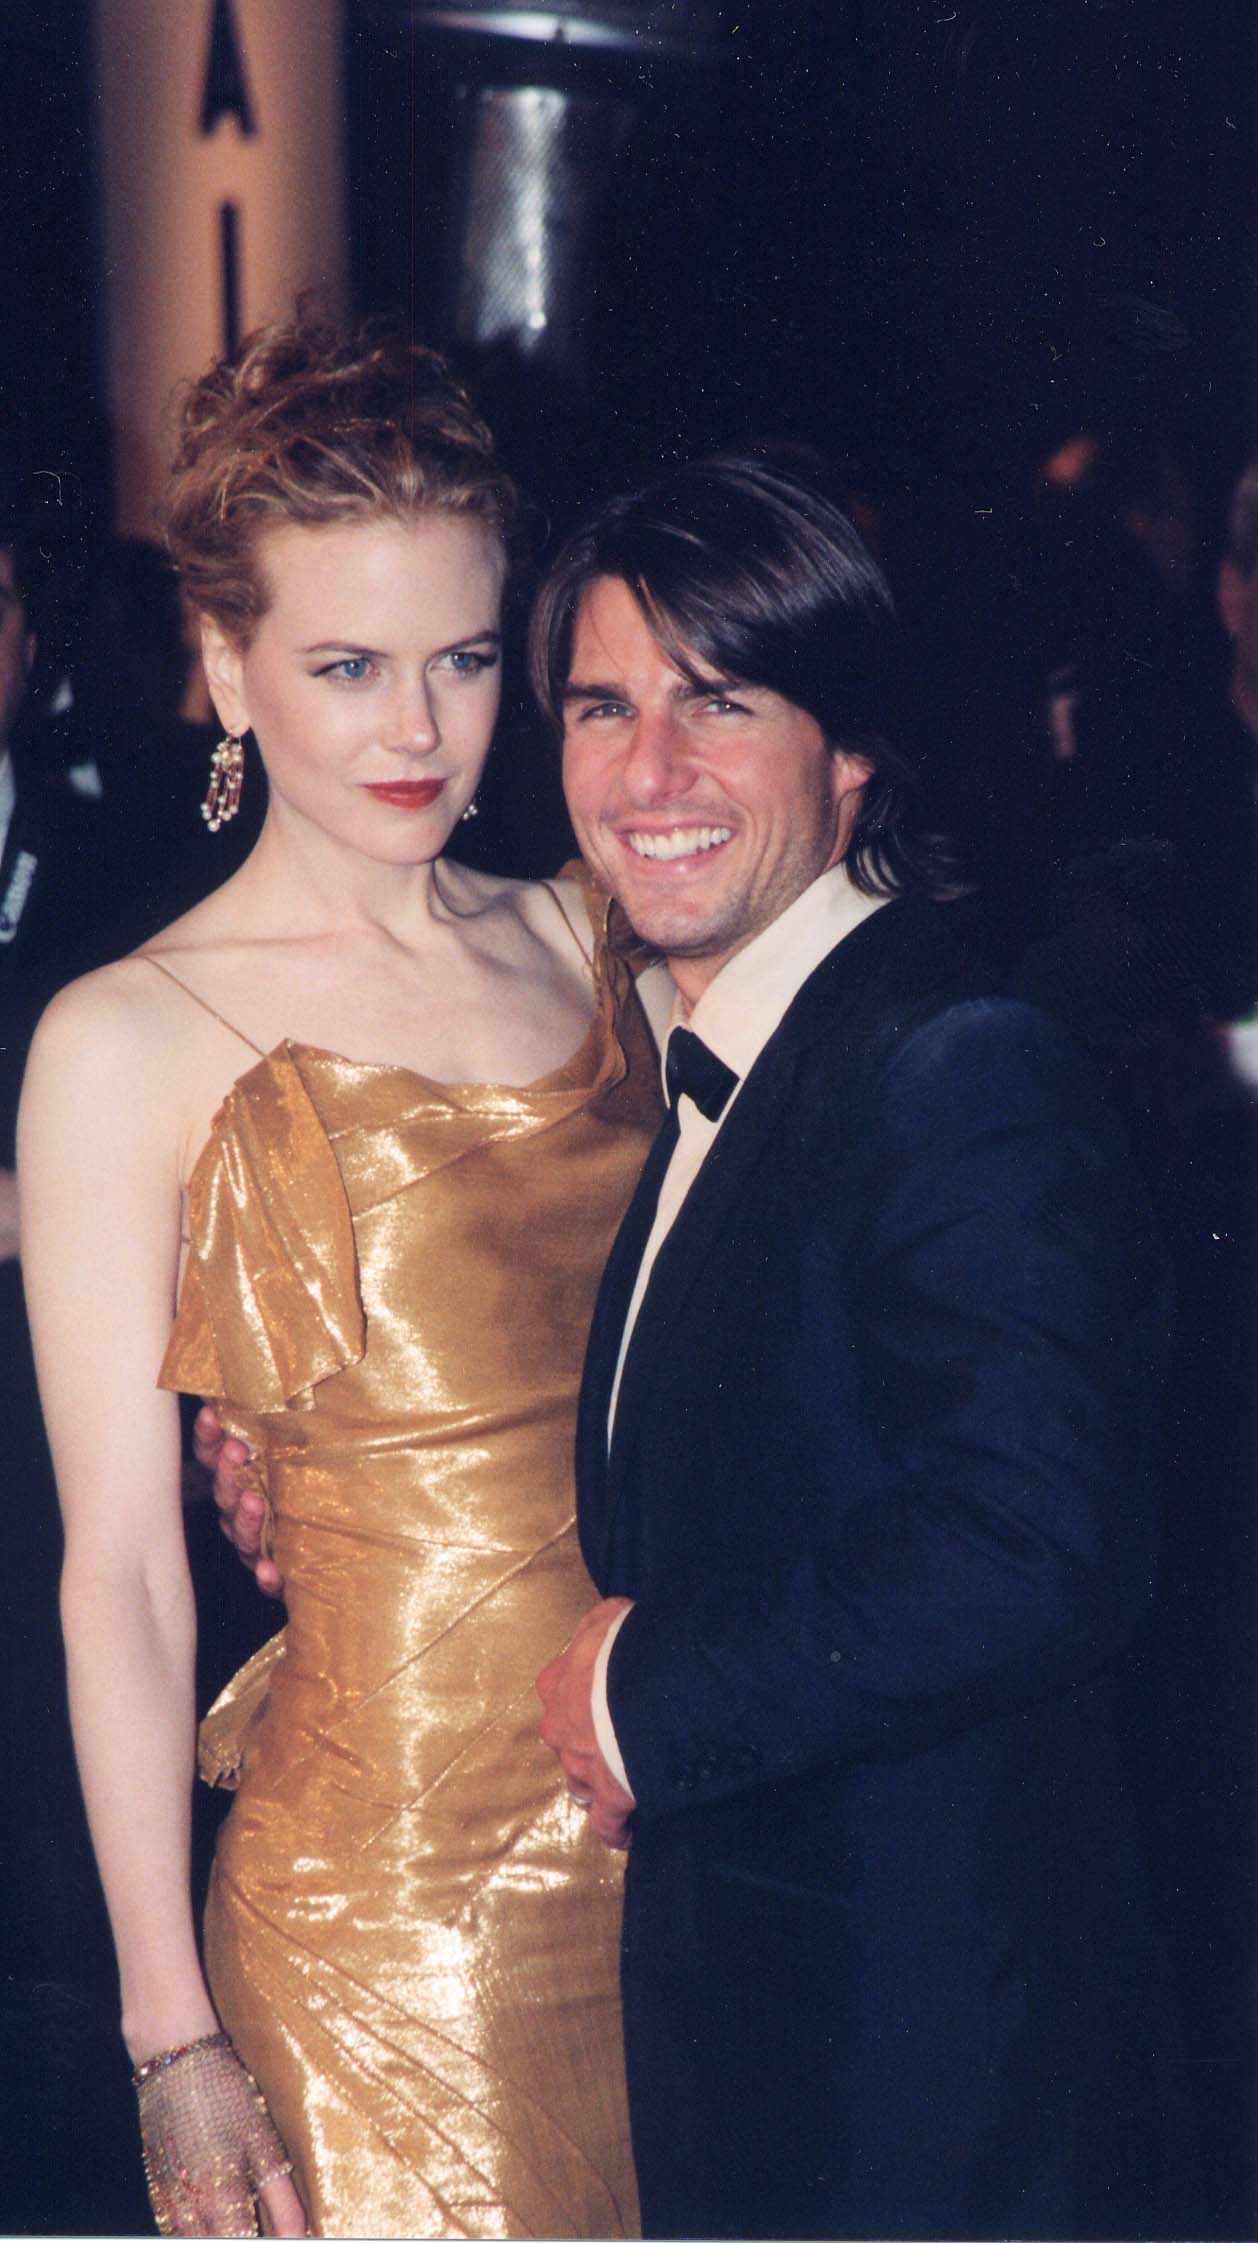 Nicole Kidman and Tom Cruise during The 72nd Annual Academy Awards in Los Angeles, California | Source: Getty Images